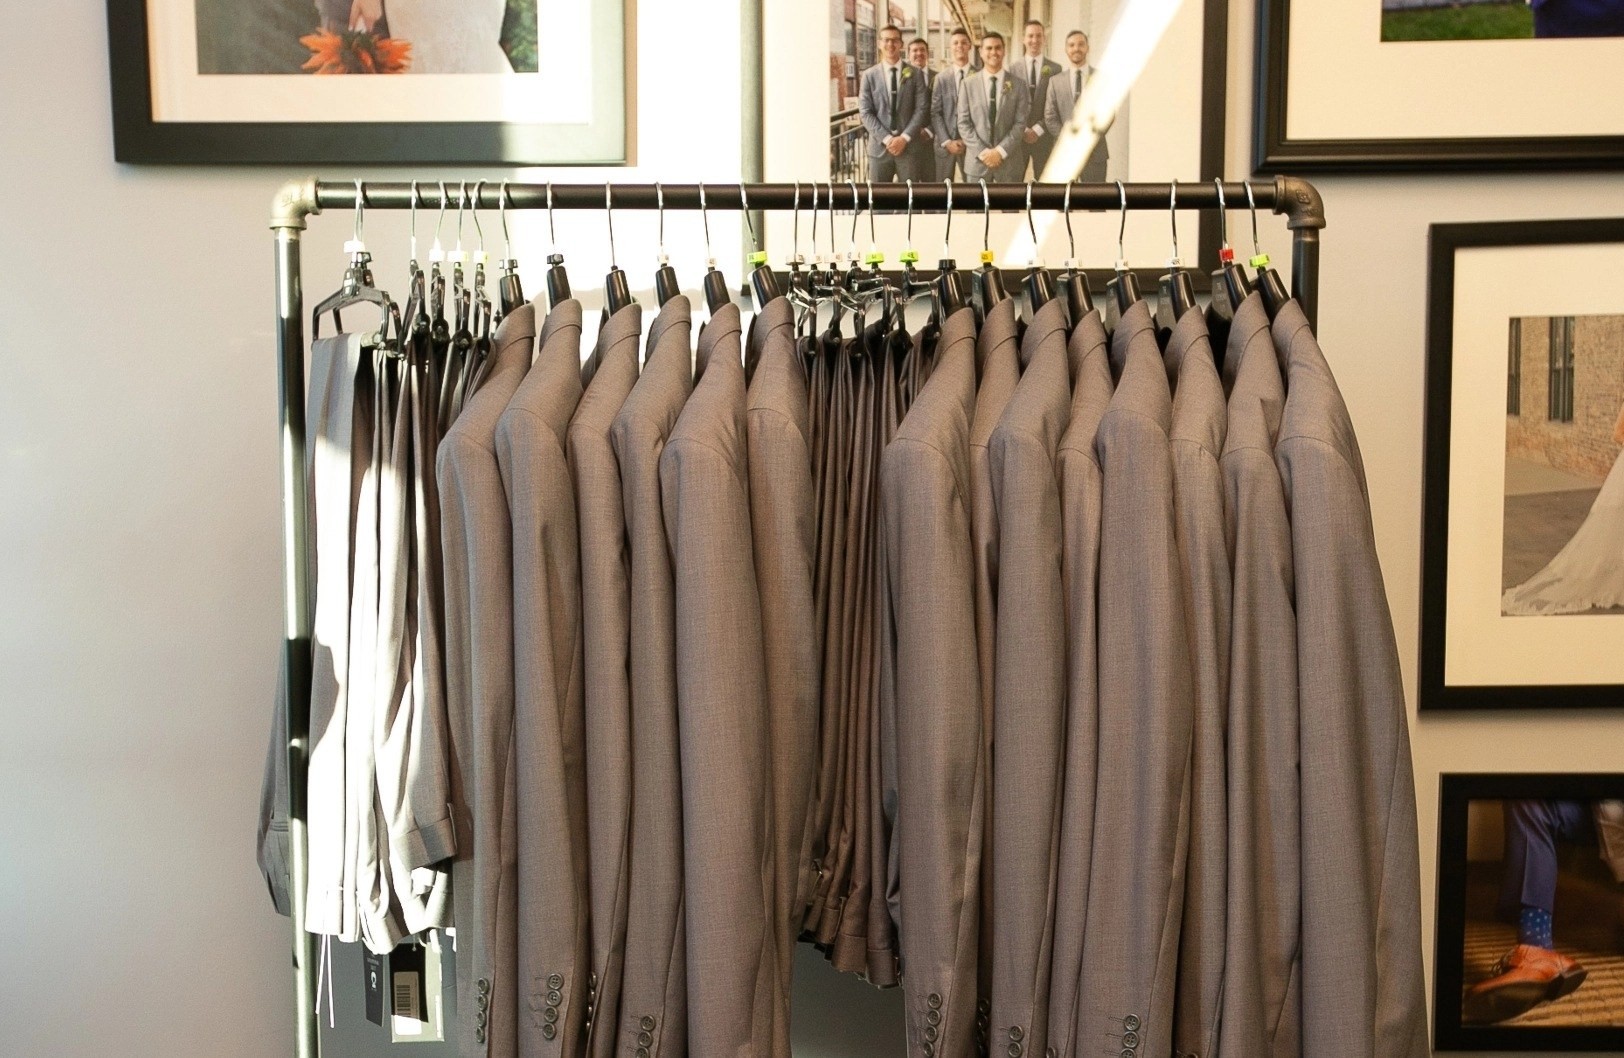 Grey suit jackets & pants in front of wedding photo gallery wall at suit store in Boston.